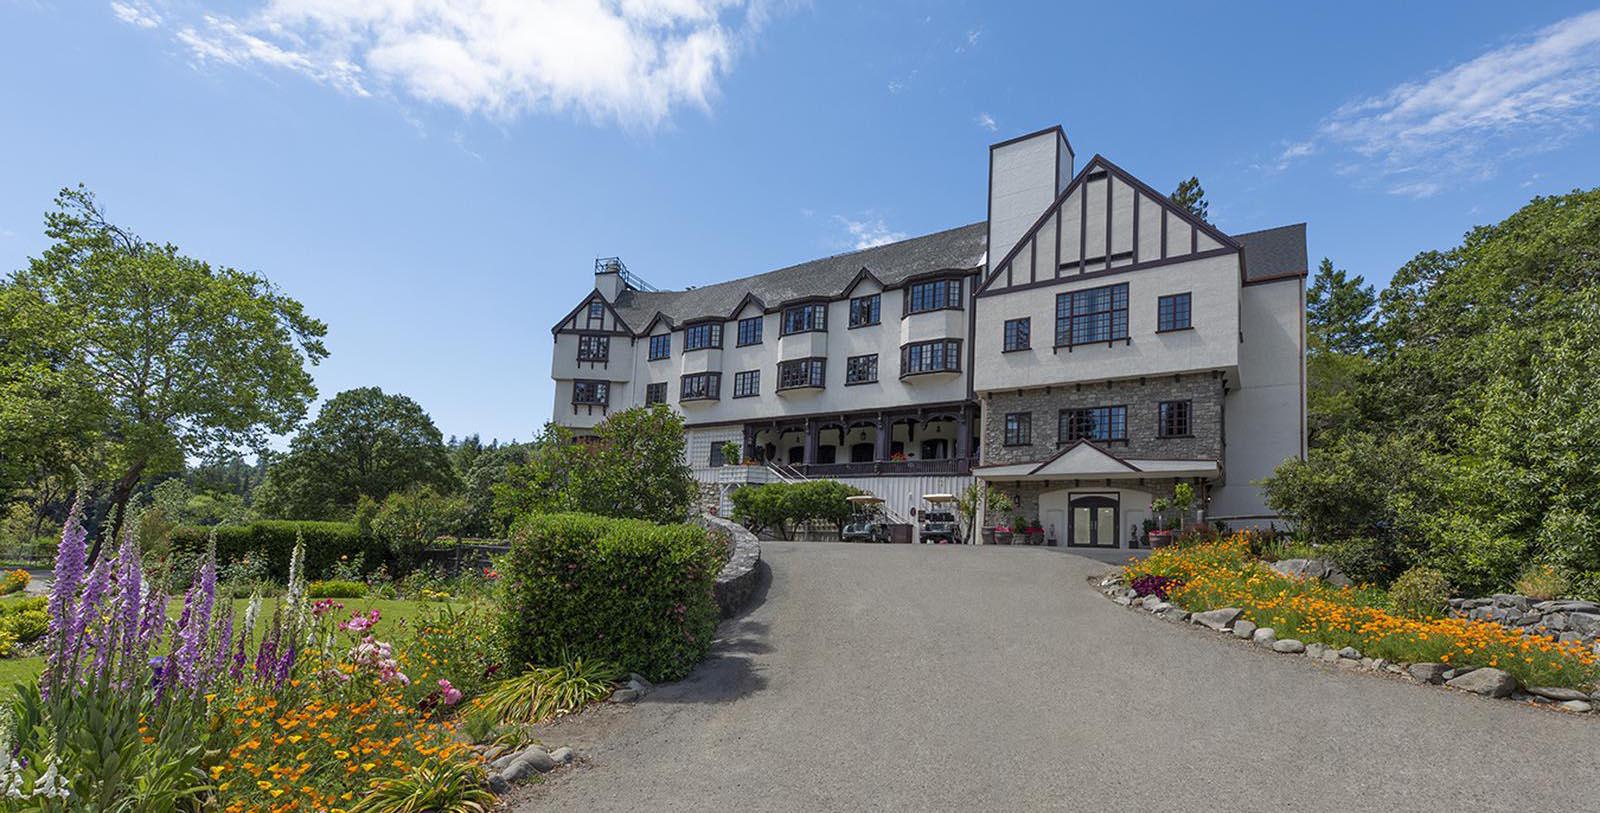 Discover the original Tudor Revival-style architecture of the Benbow Inn.